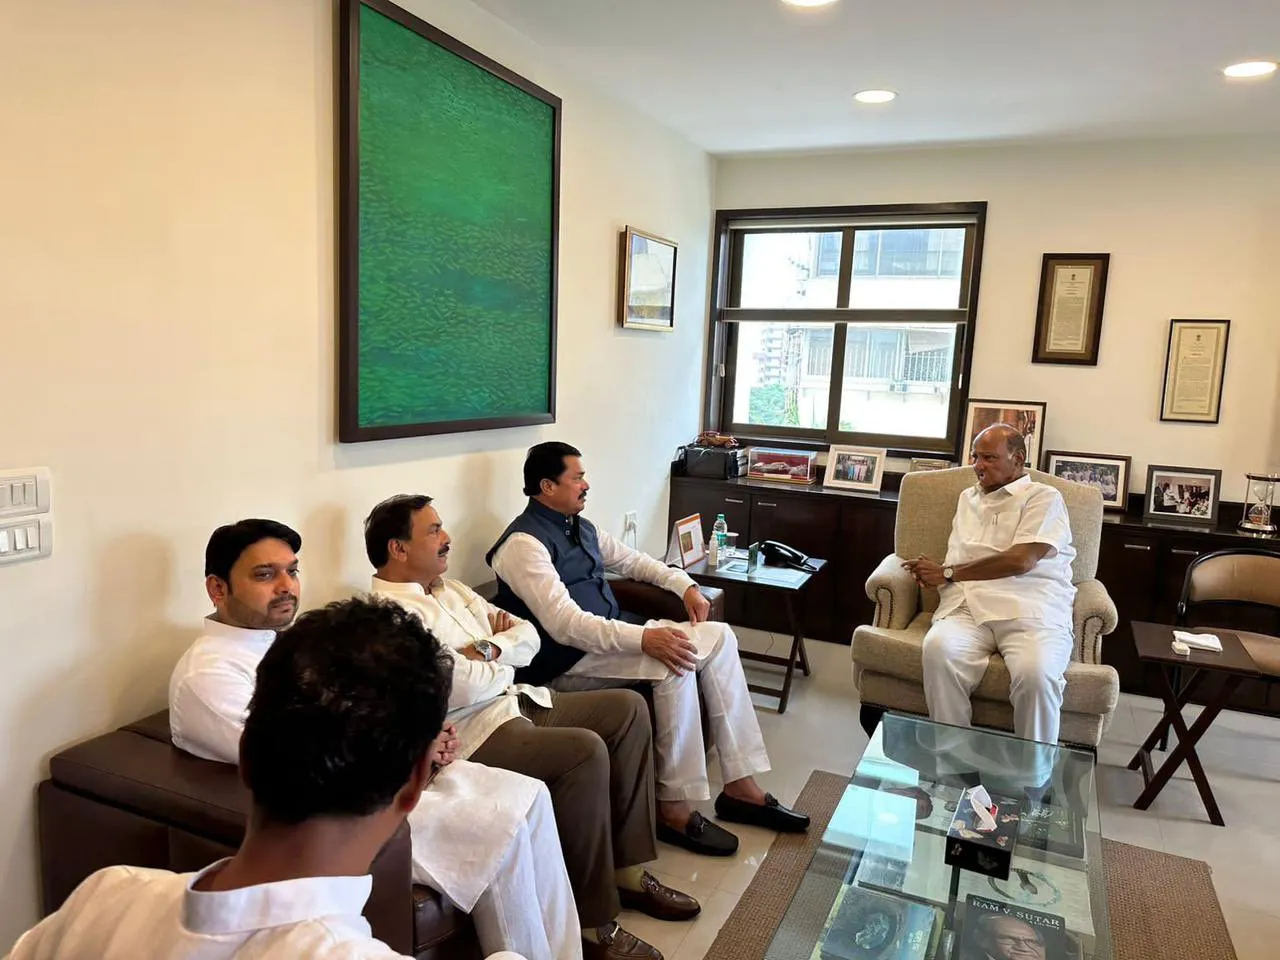 NCP chief Sharad Pawar in a meeting with Maharashtra Pradesh Congress Committee President Nana Patole and others, at YB Chavan Center in Mumbai